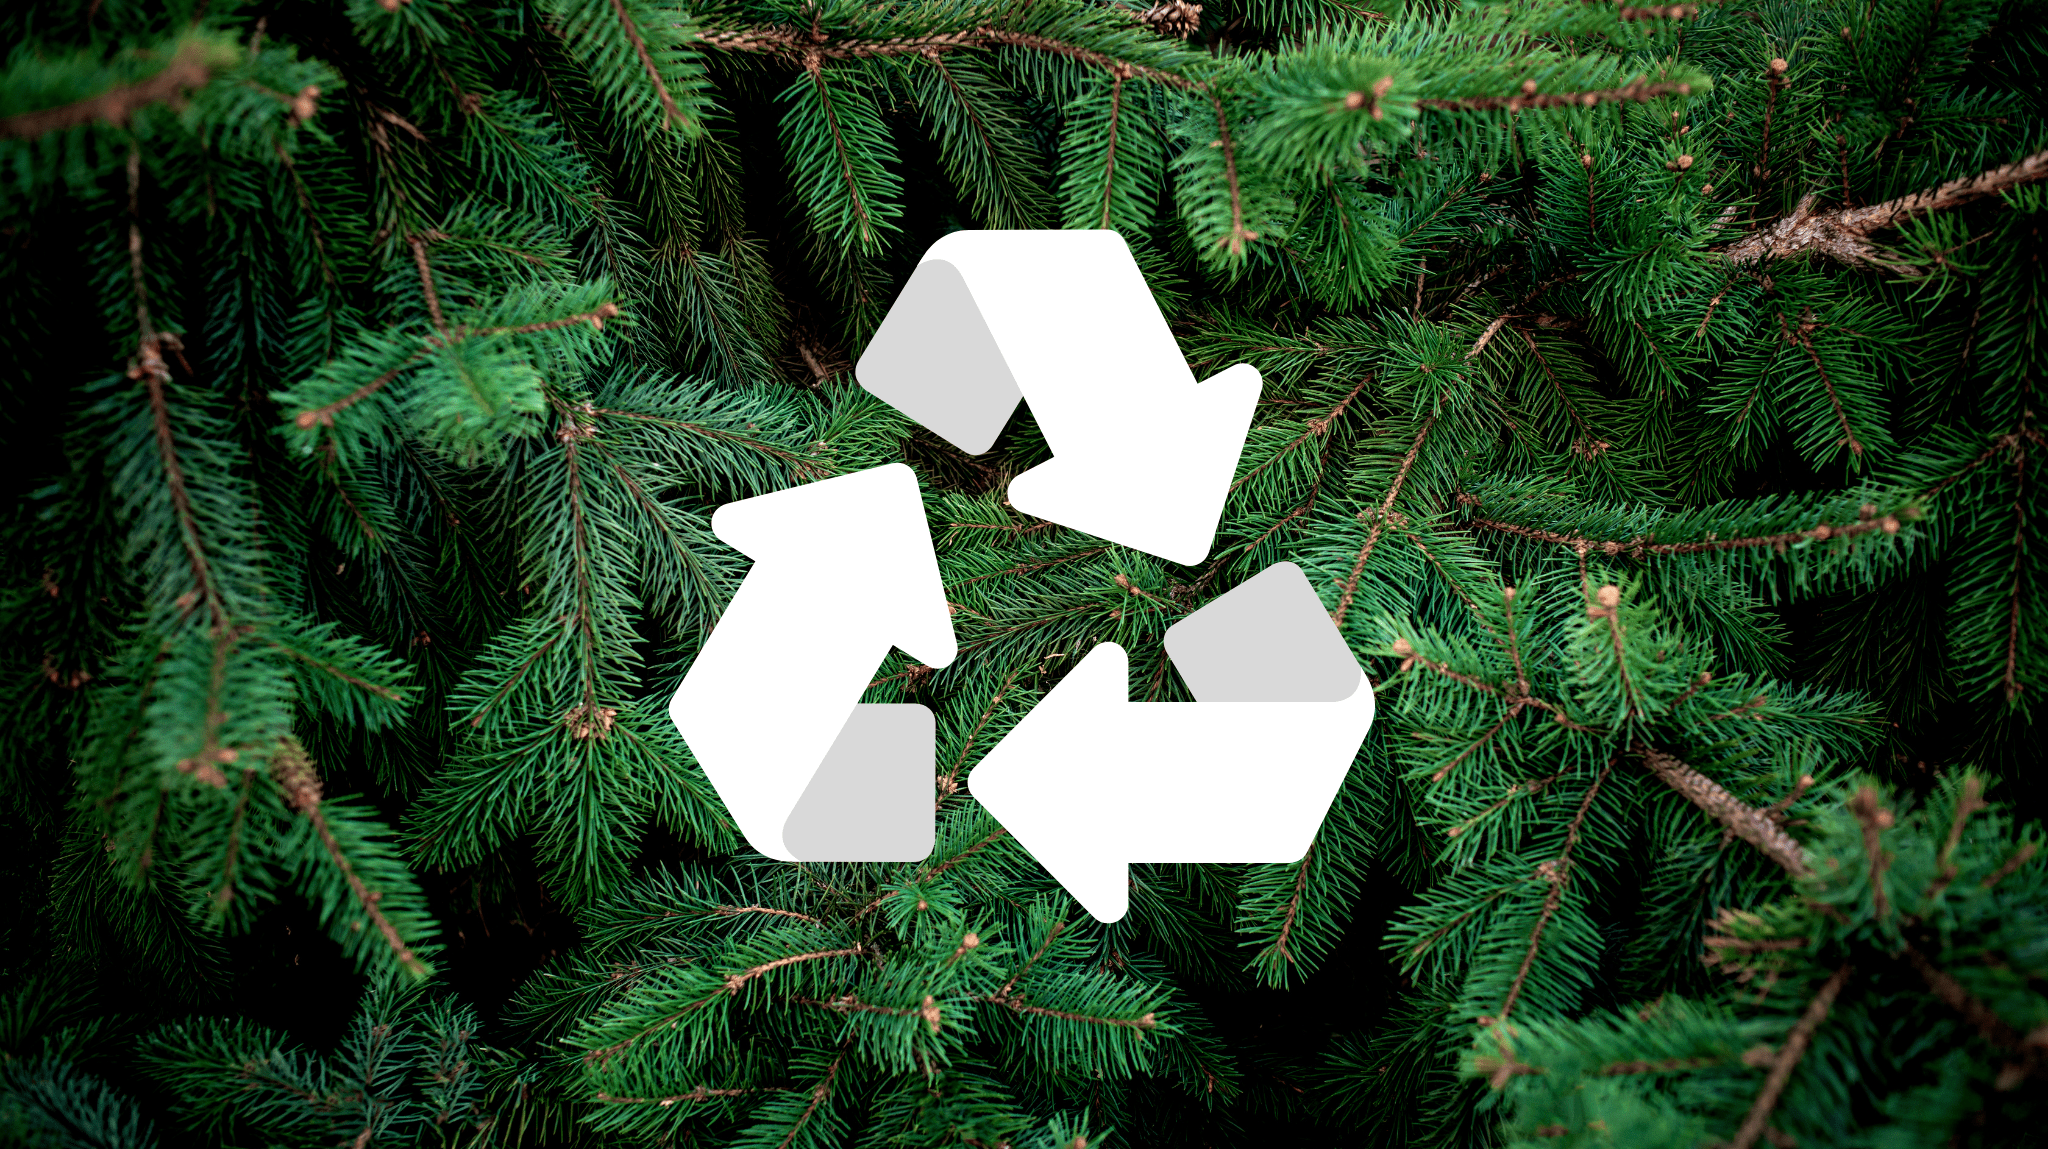 Featured image for “Dec. 26 is coming. Here’s how to recycle your Christmas tree”